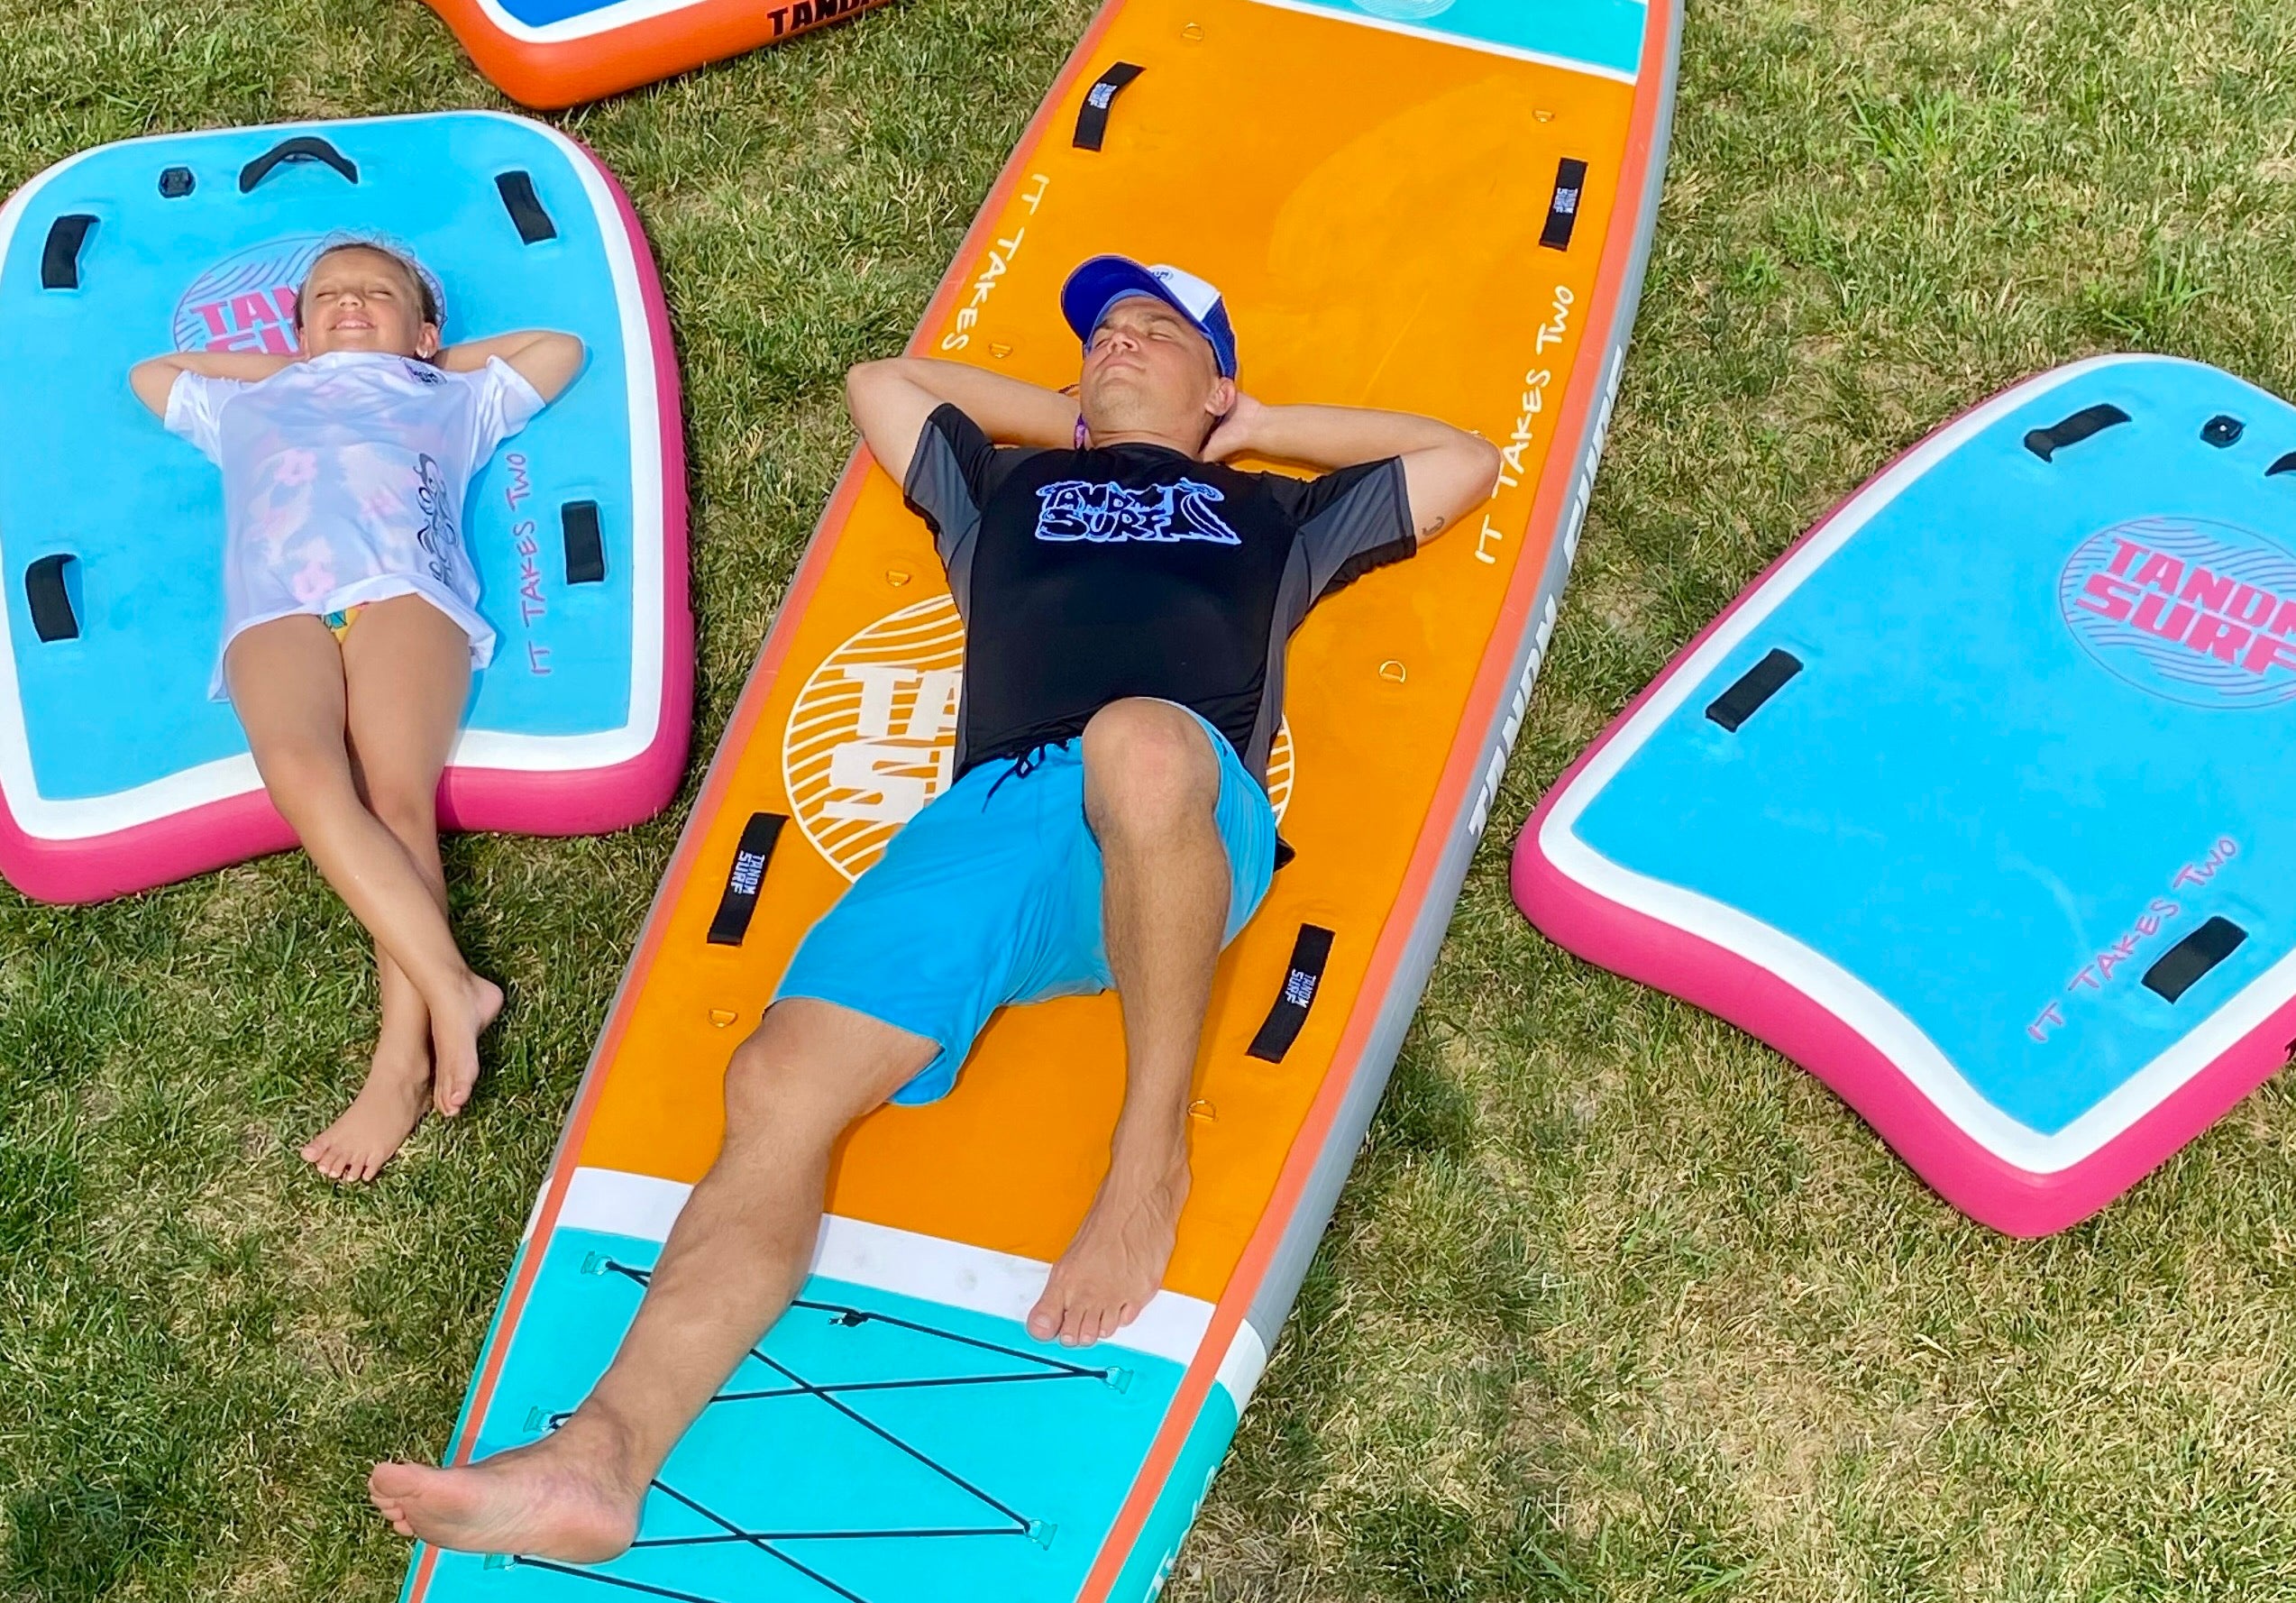 TANDM Surf Ambassador & YouTuber Uses TANDM boards to Help His Kids Gain Confidence in the Ocean